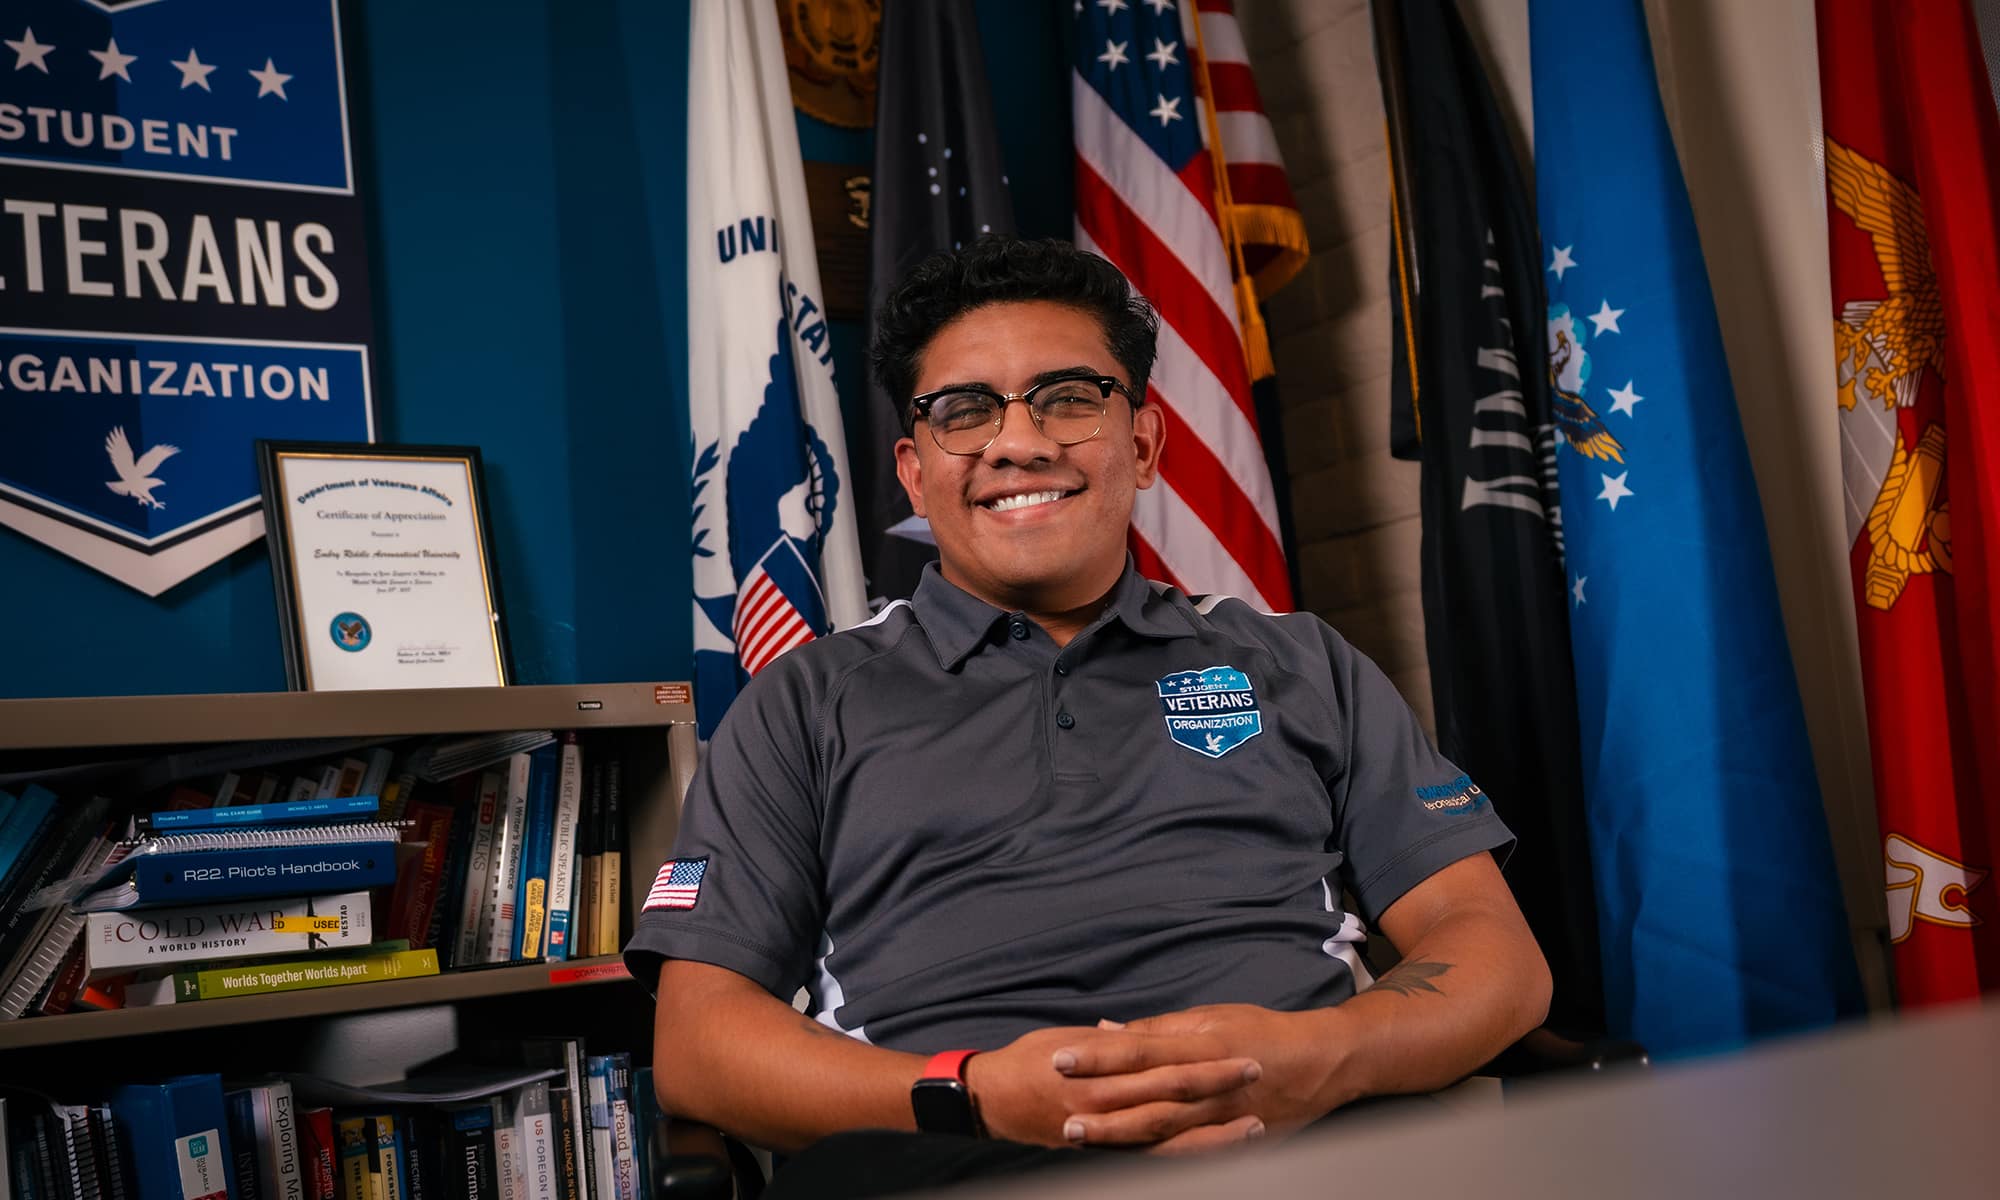 Vincent Becerra is a U.S. Air Force veteran and Industrial/Organizational Psychology student putting his studies to work for his fellow veterans on campus.